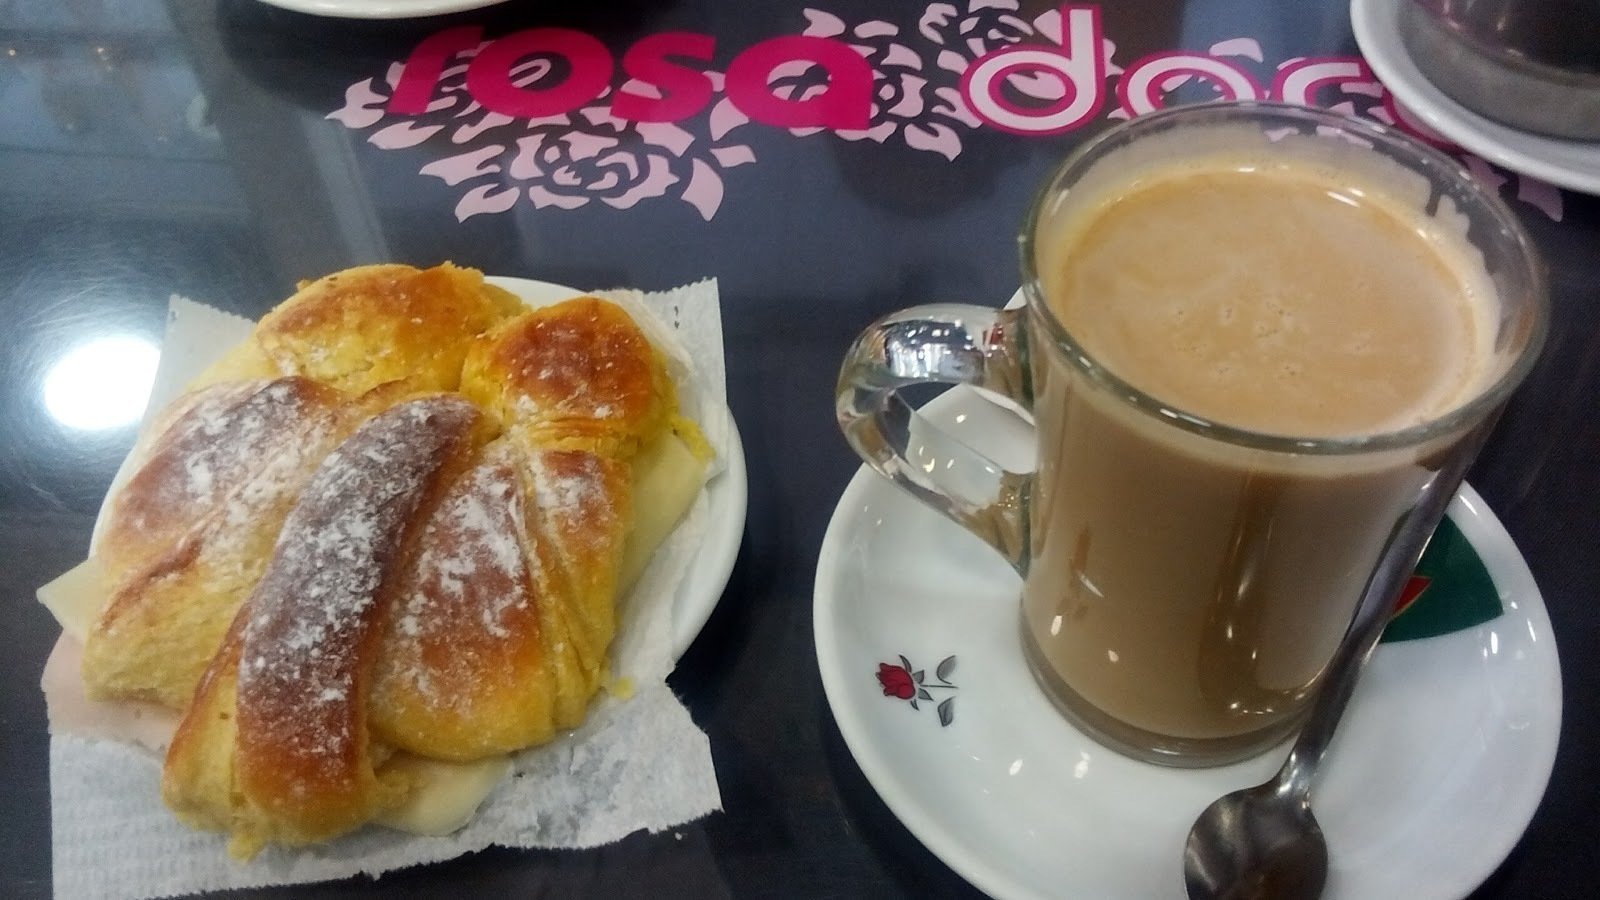 Rosa Doce: A Work-Friendly Place in Lisbon